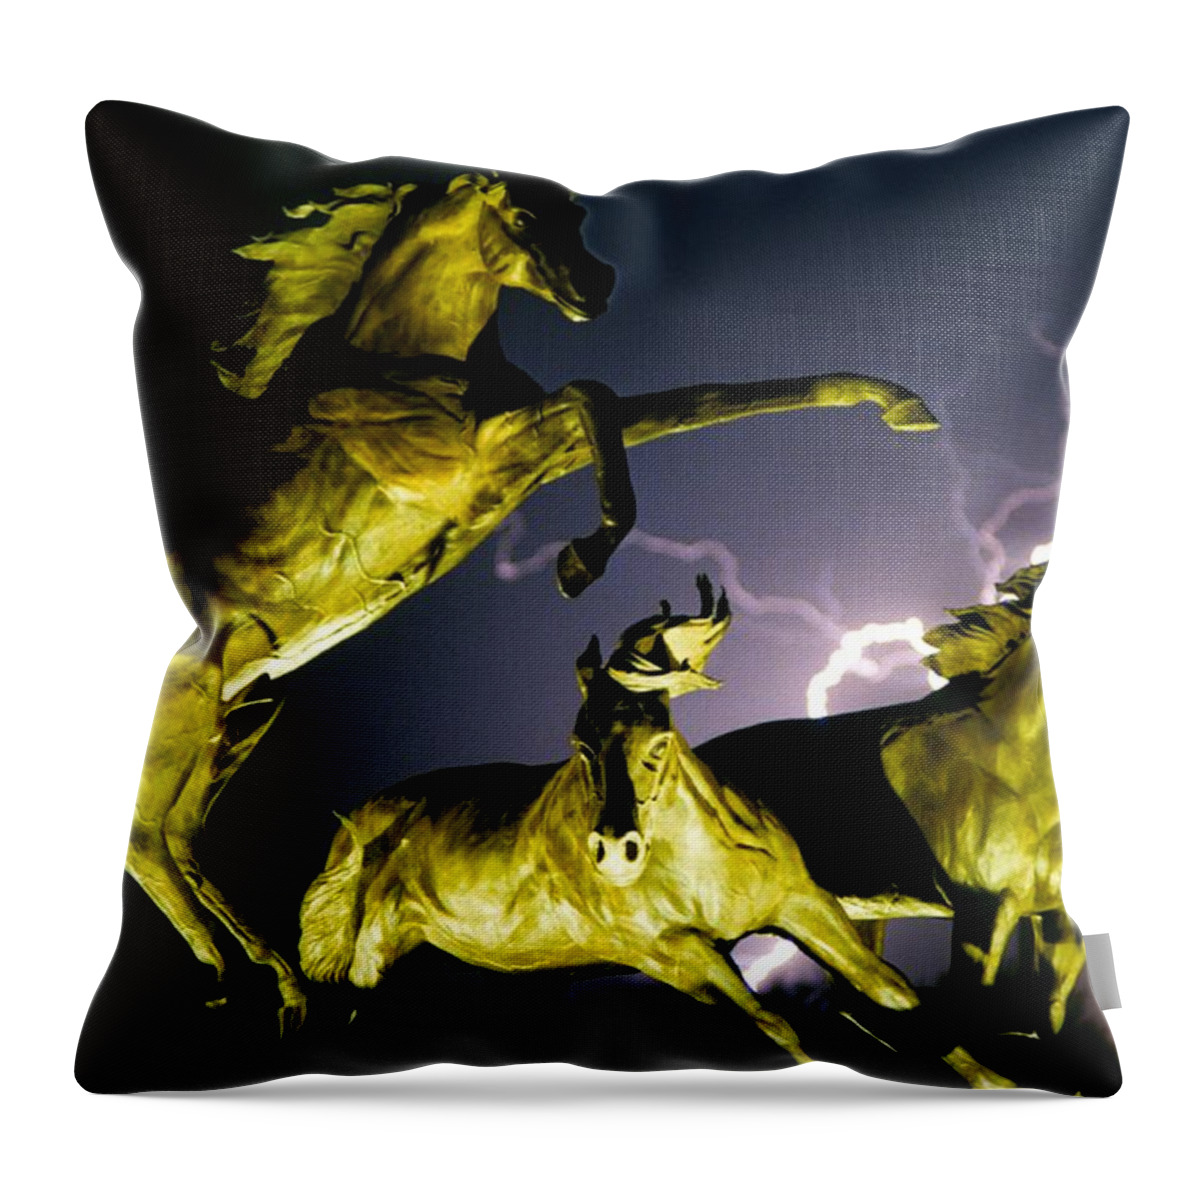 Lightning Throw Pillow featuring the photograph Lightning At Horse World Fine Art Print by James BO Insogna